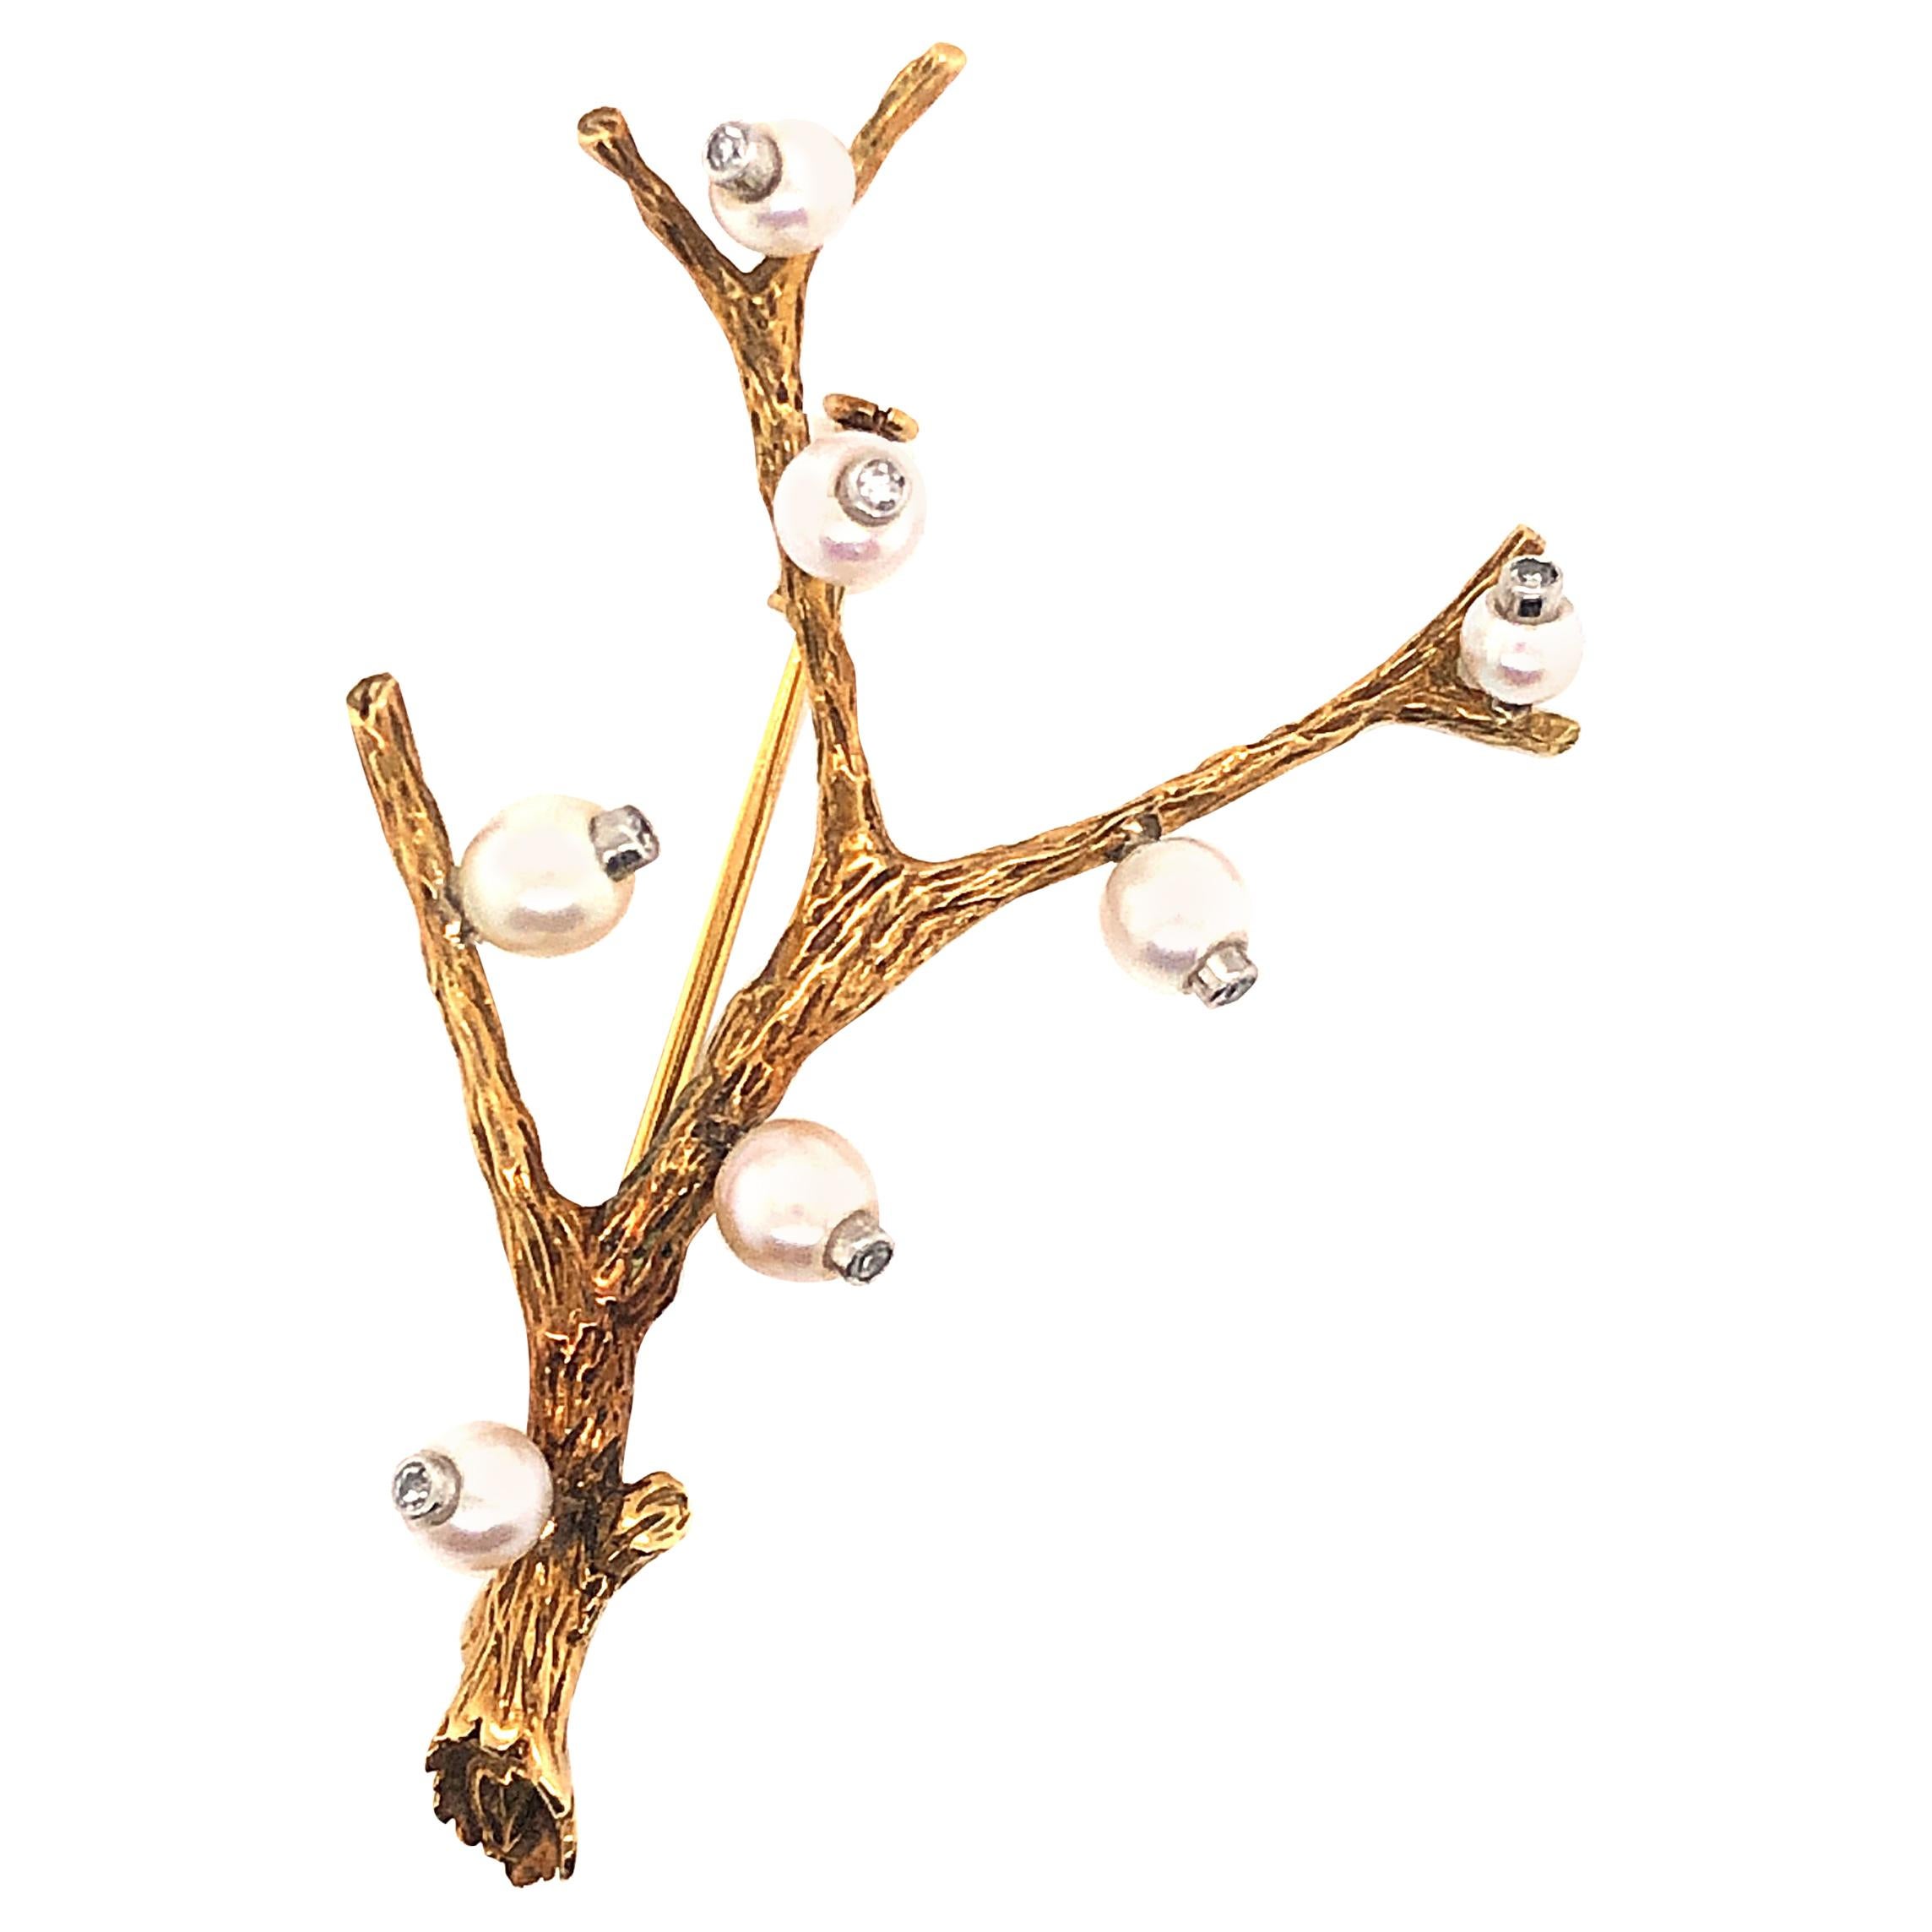 Sterle Paris 18k Floral Branch Natural Pearl and Diamond Brooch